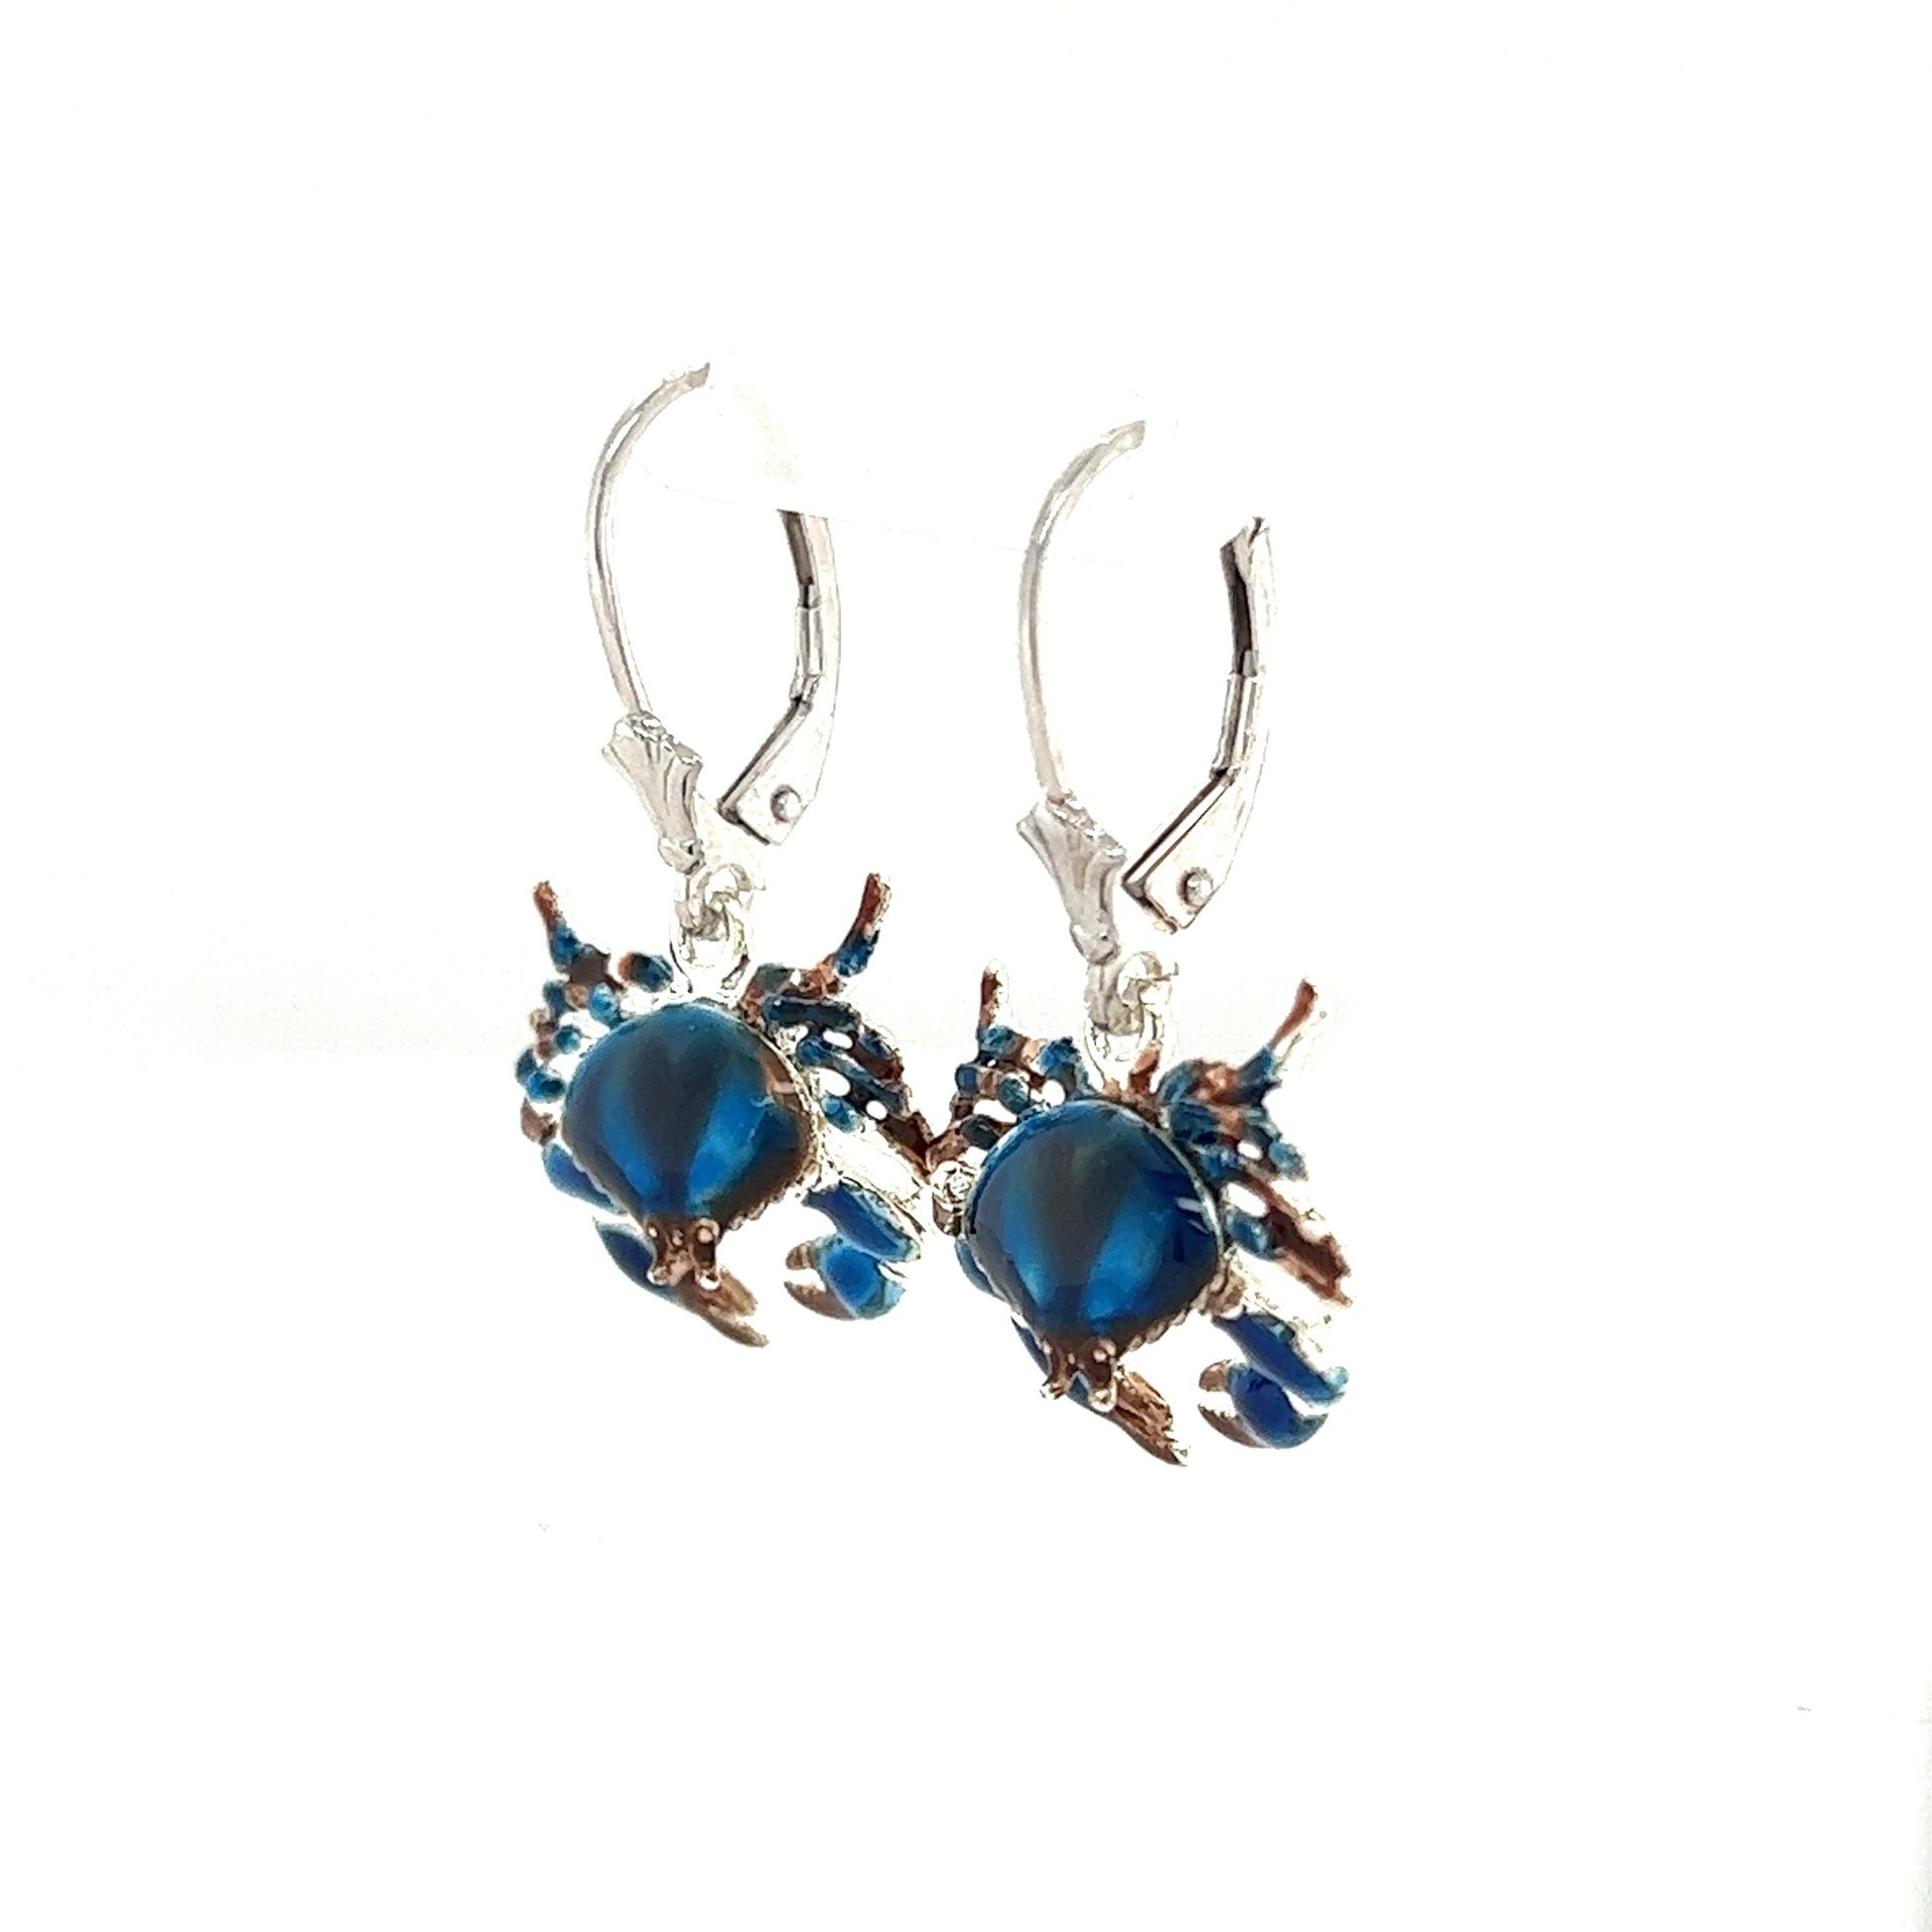 Stone Crab Dangle Earrings with Enameling in Sterling Silver Right Side View